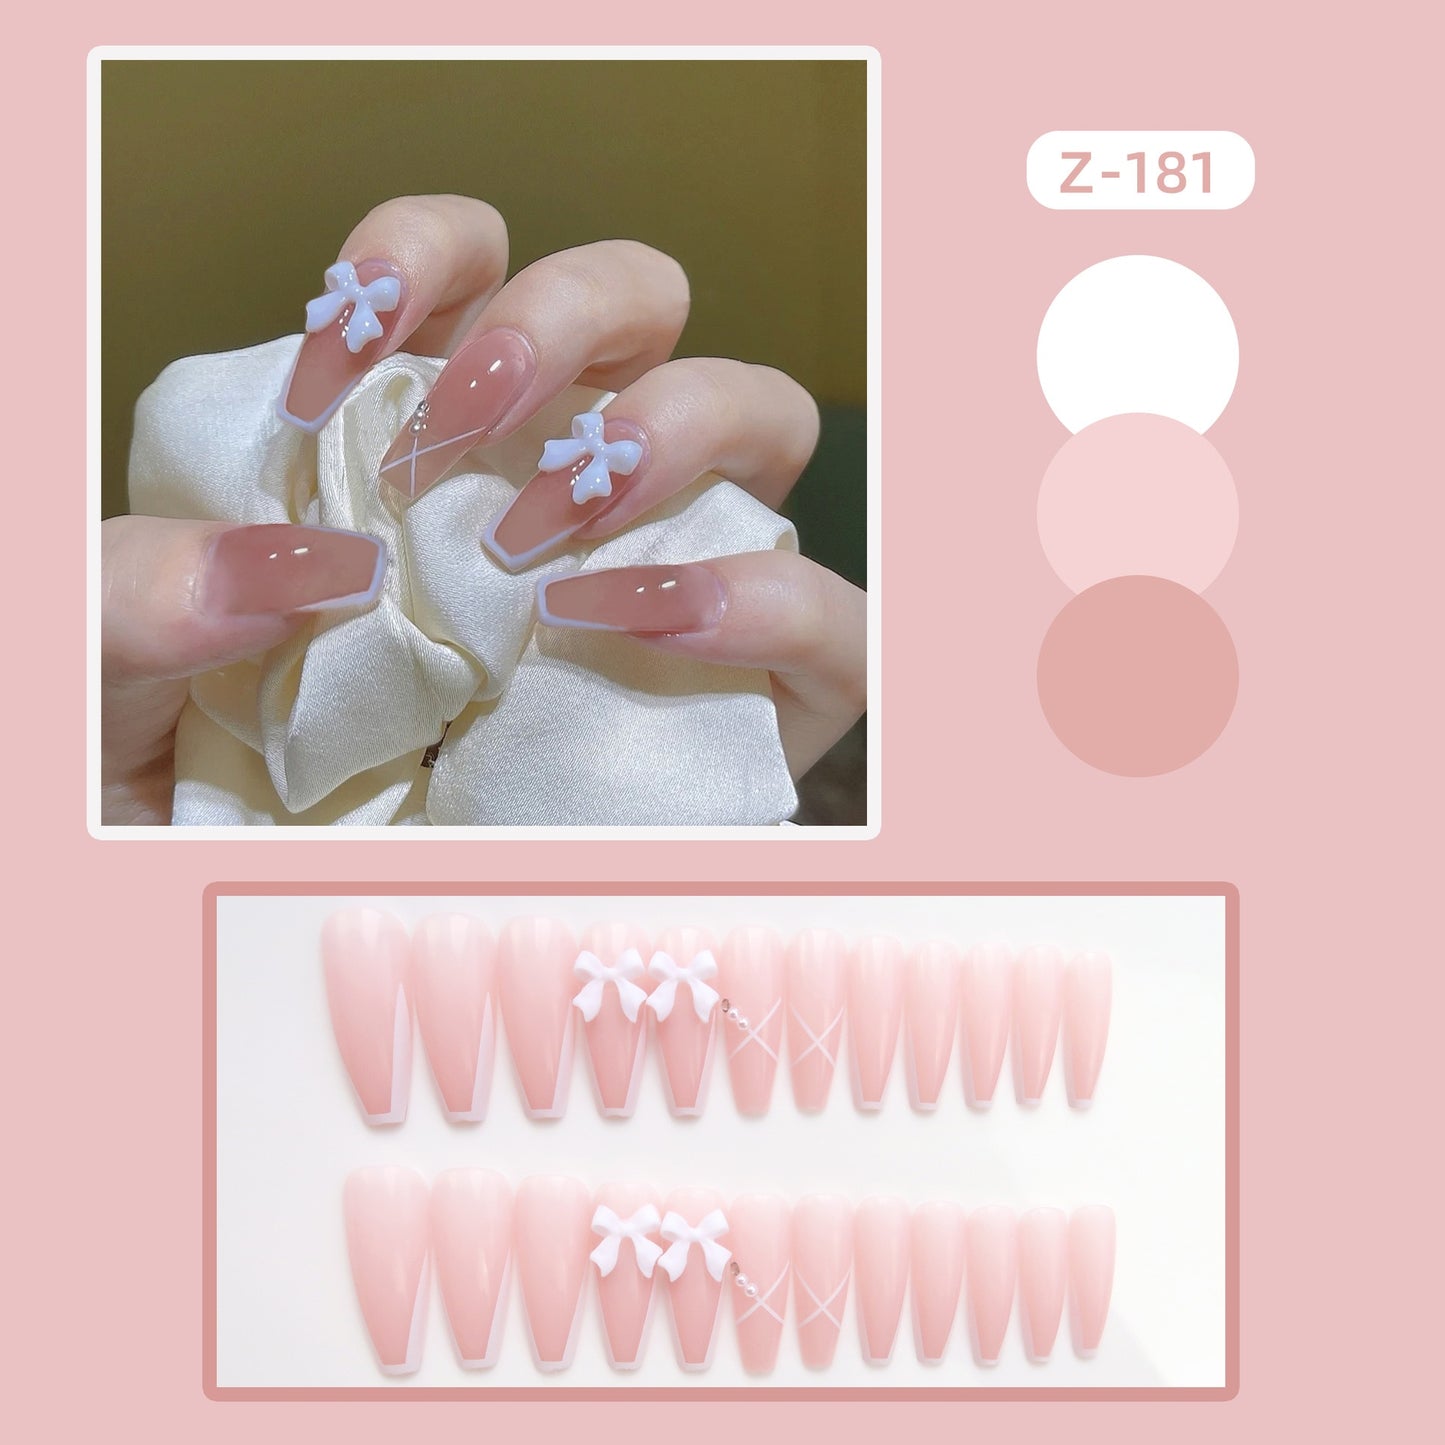 24Pcs Coffin Pink False Nails 3D Heart Diamond y2k Mid-length Fake Nails Full Finished Tulip Pattern Fake Nail Patches For Girls